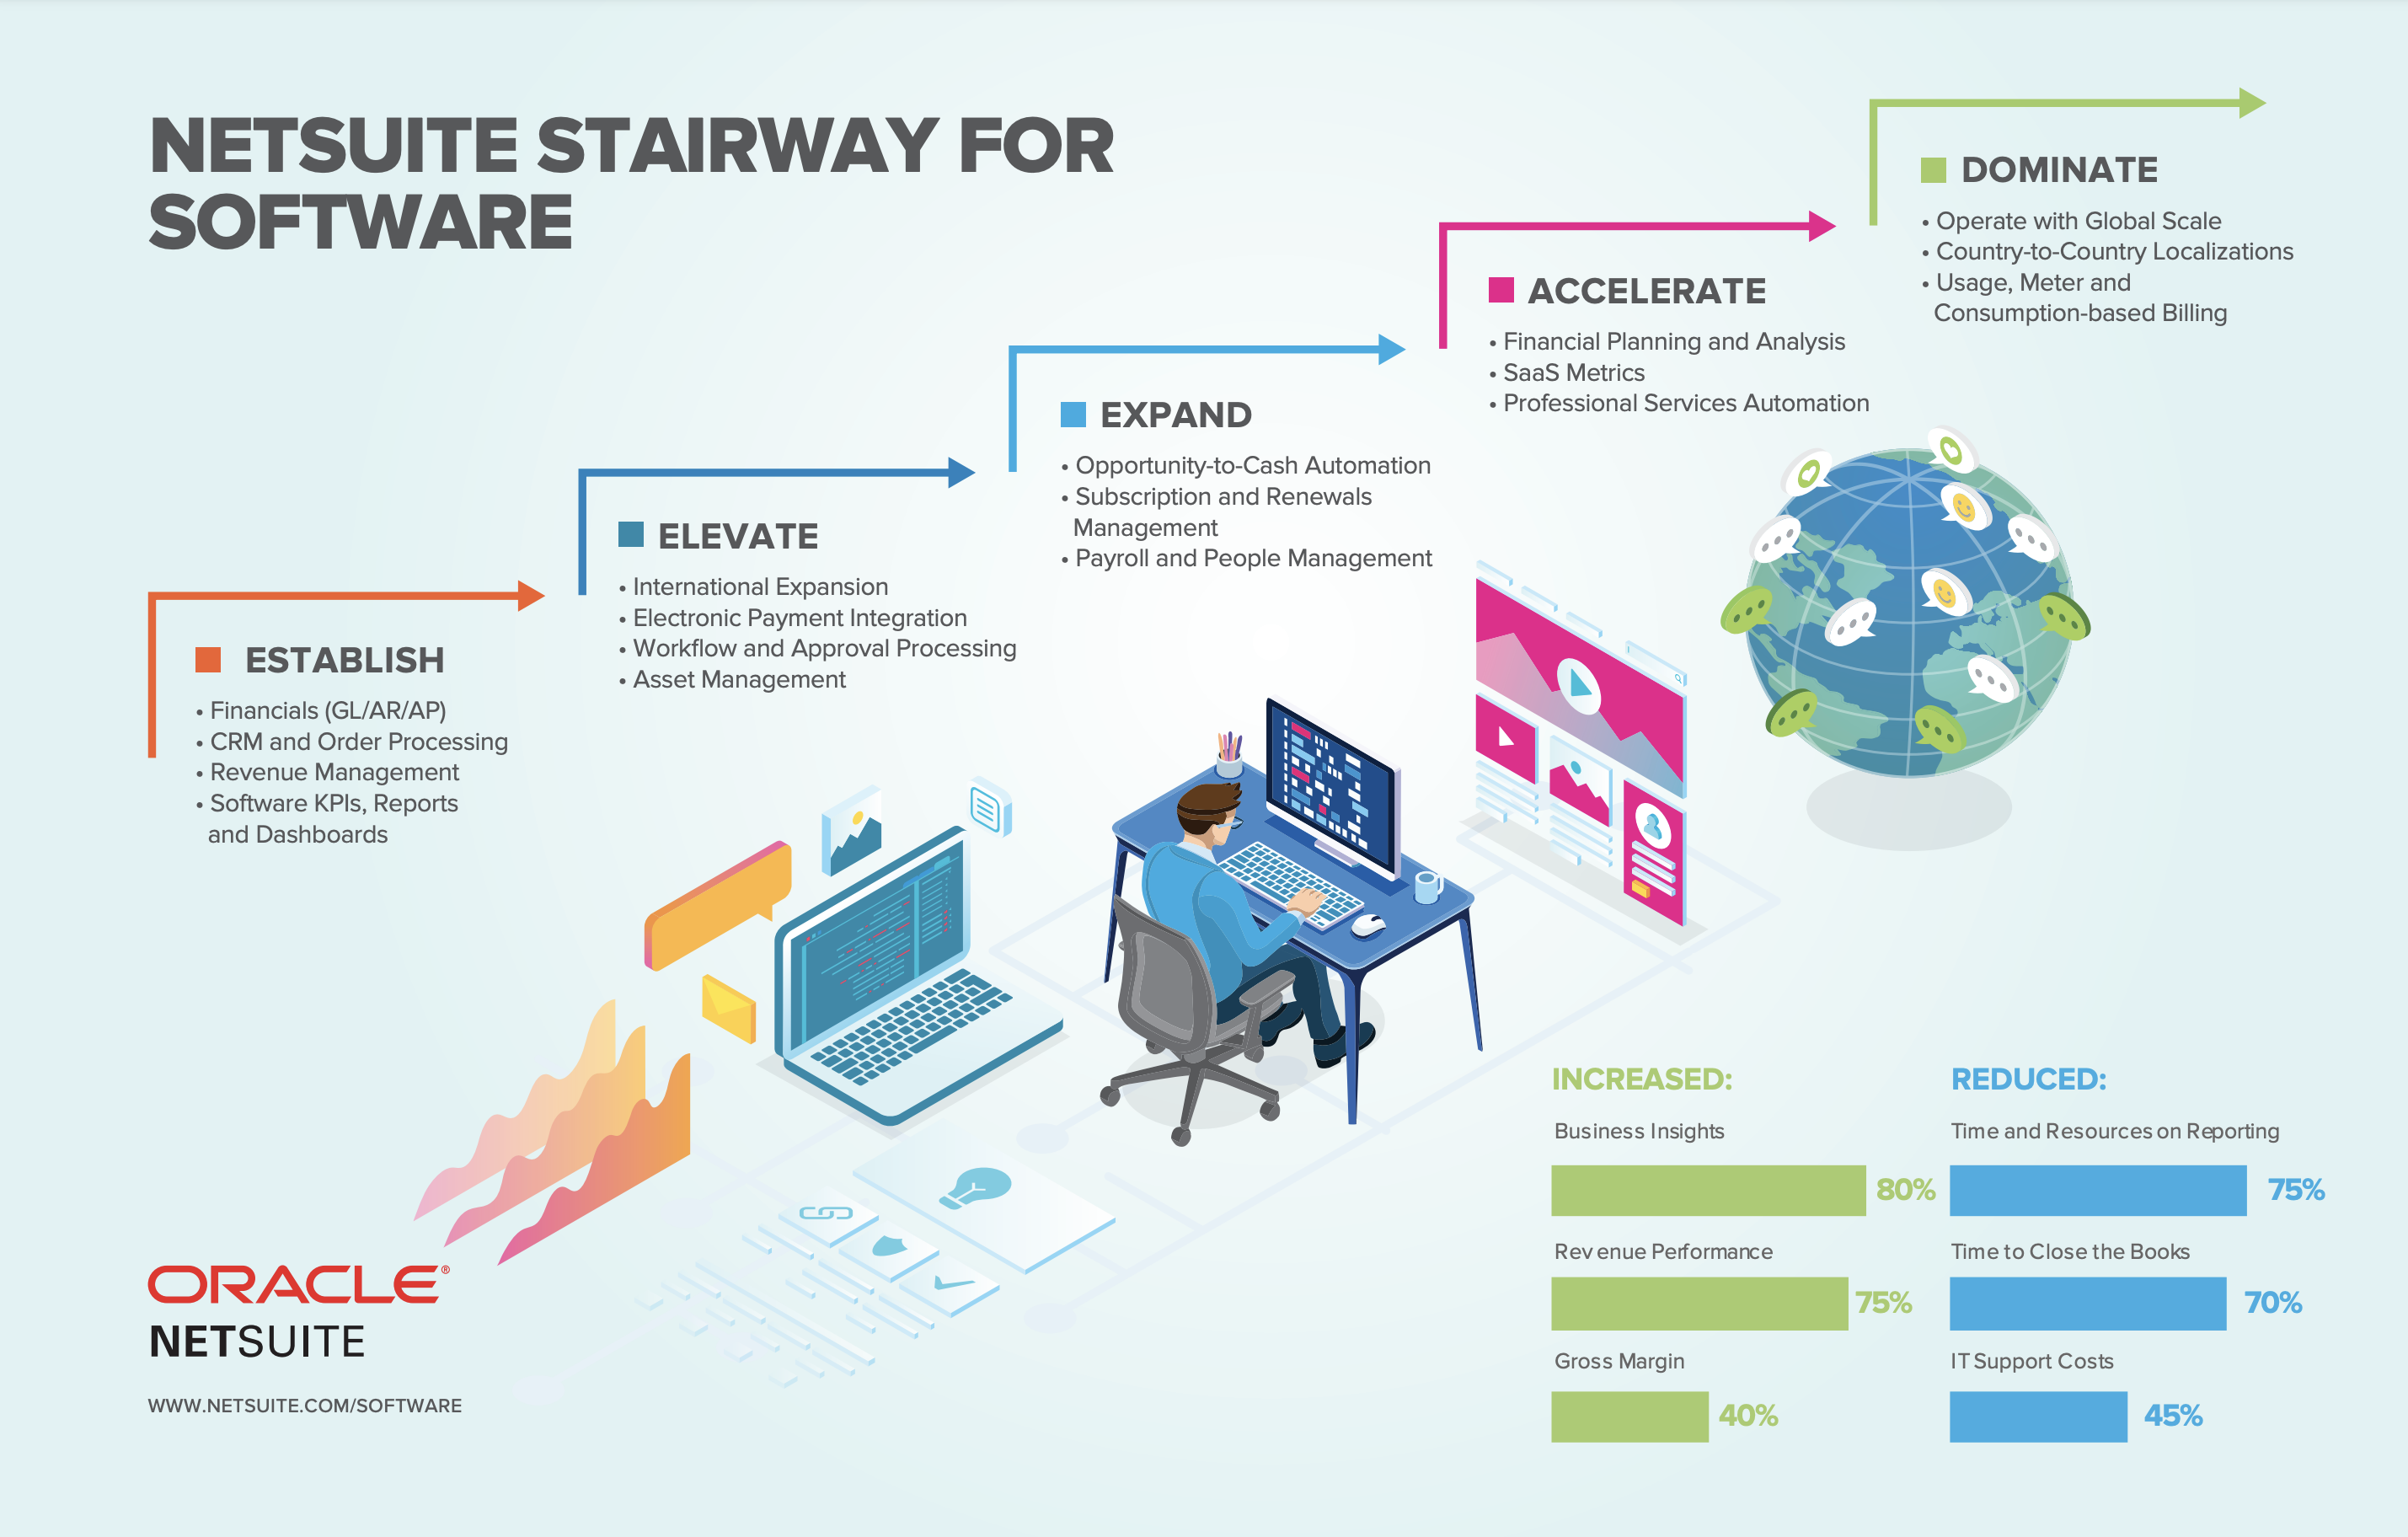 NetSuite stairway for software companies